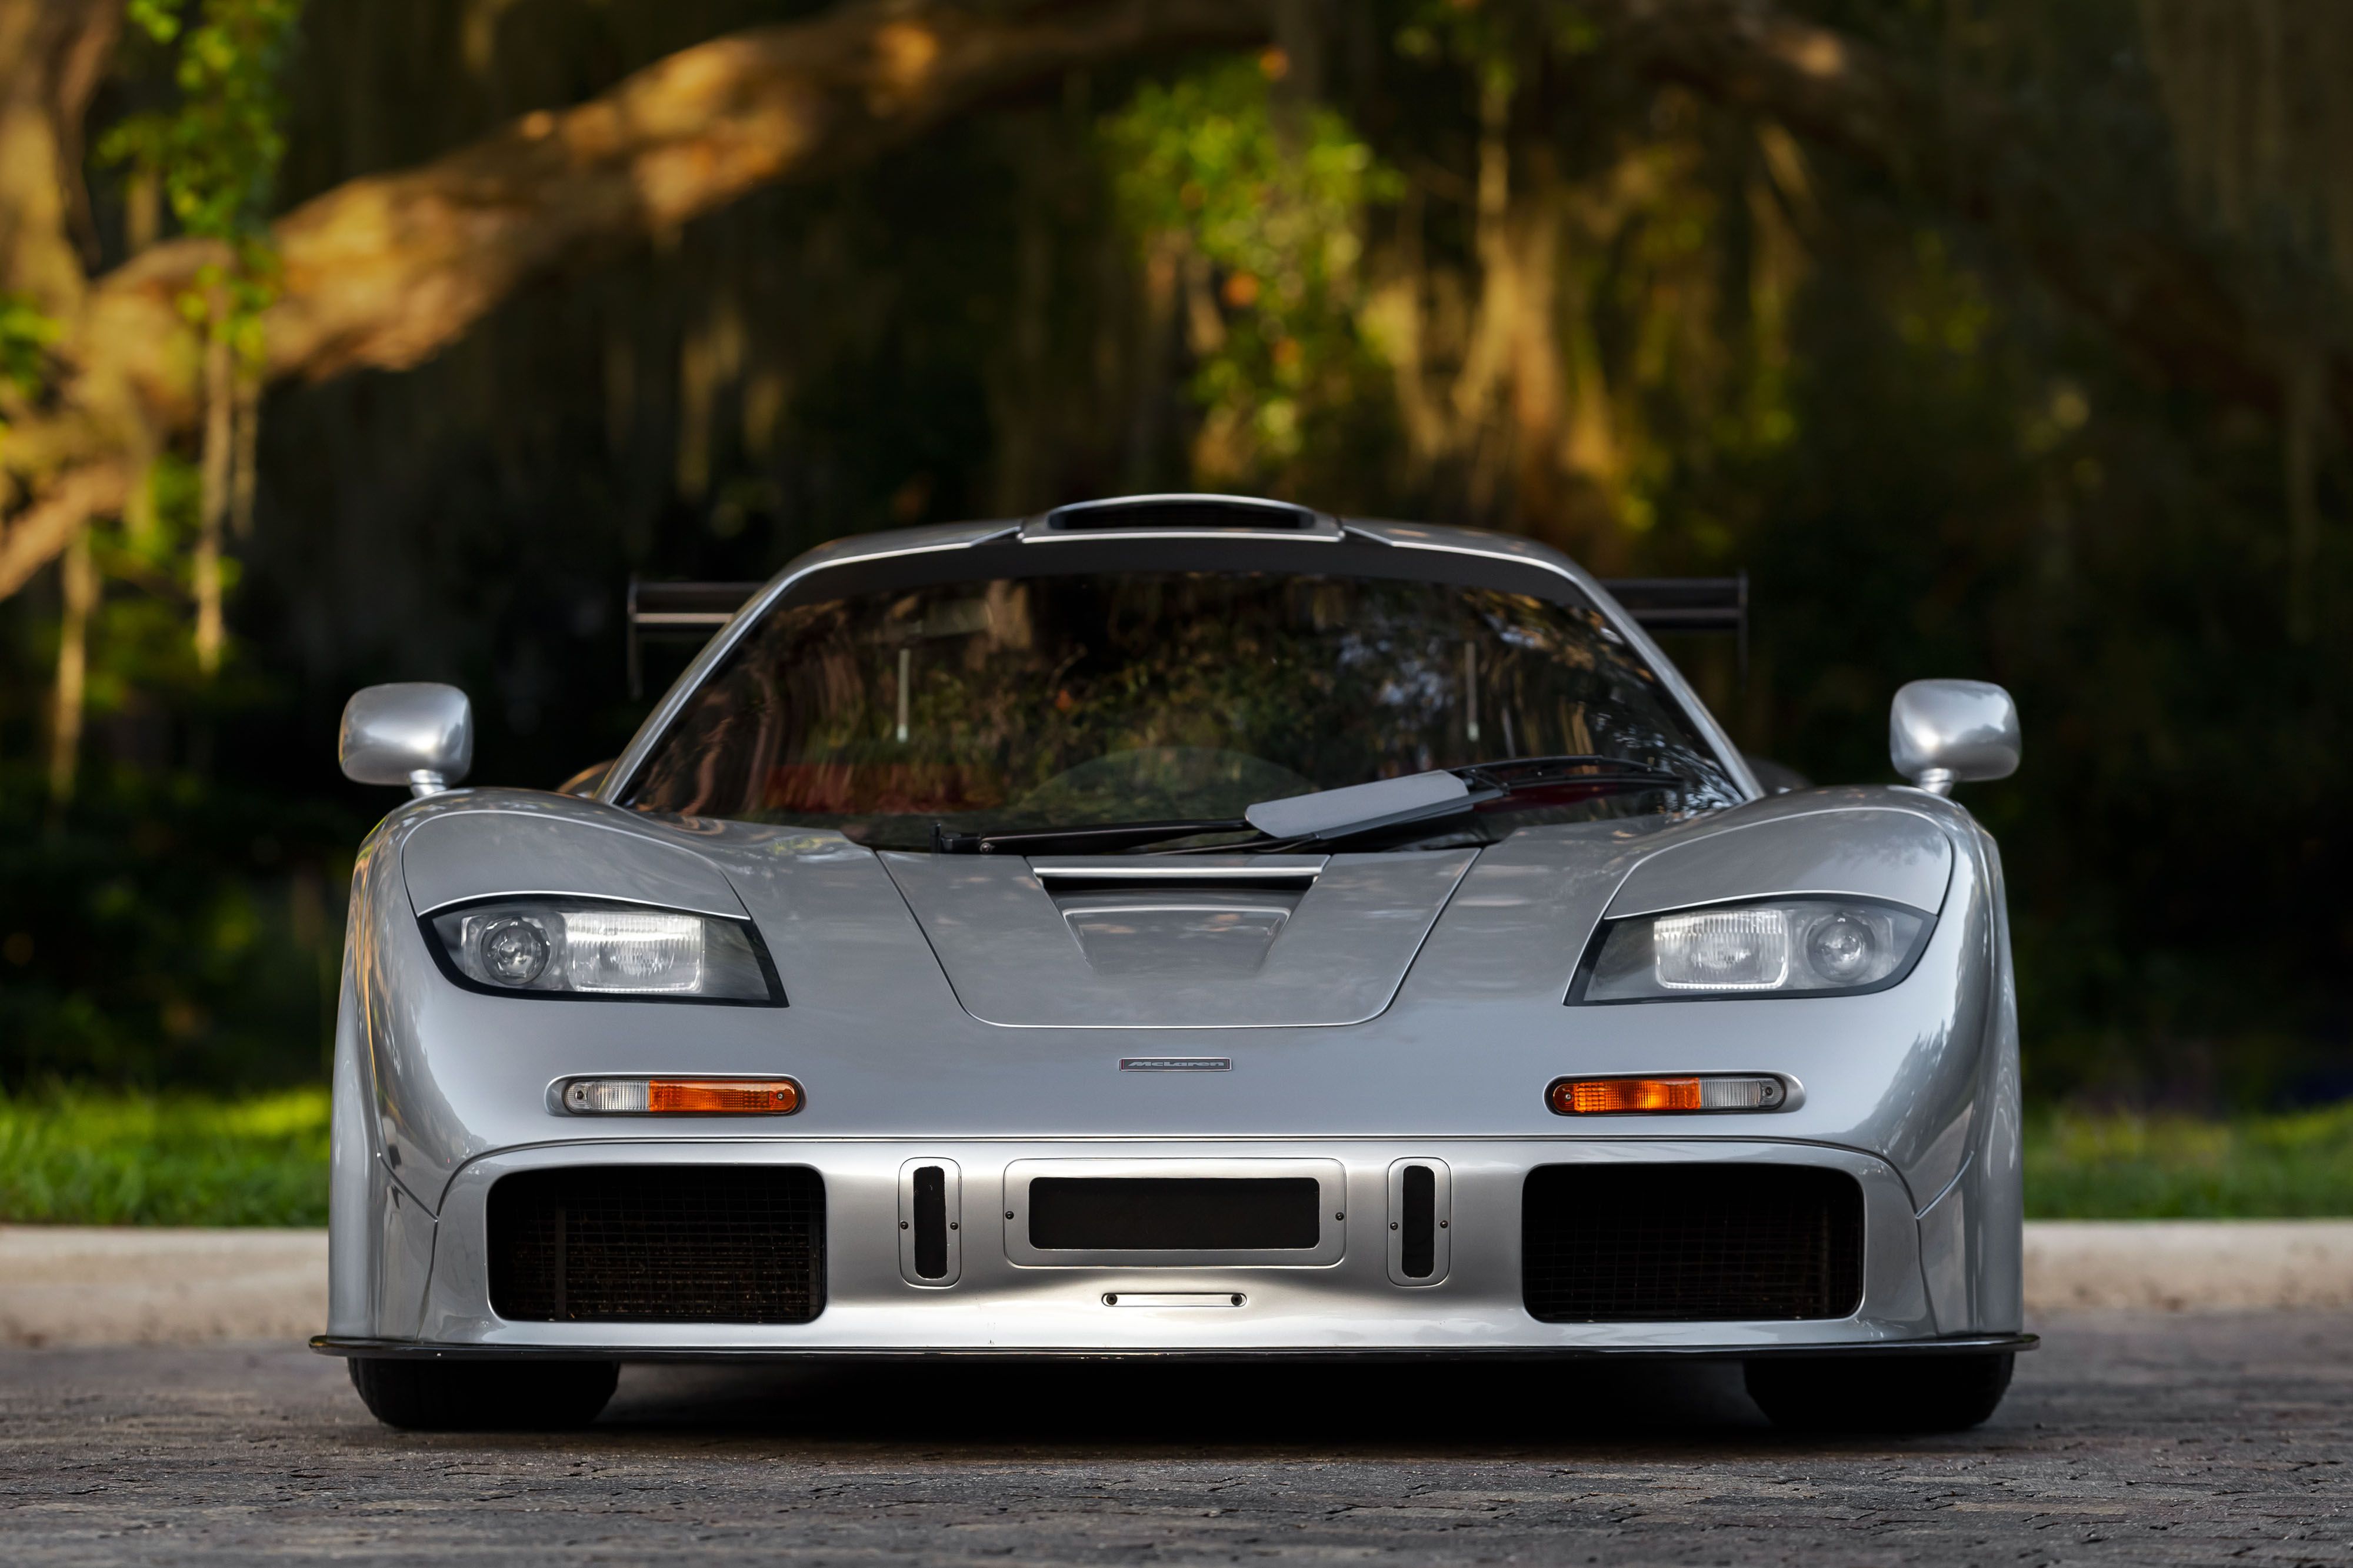 The Rarest McLaren F1 of All Is for Sale